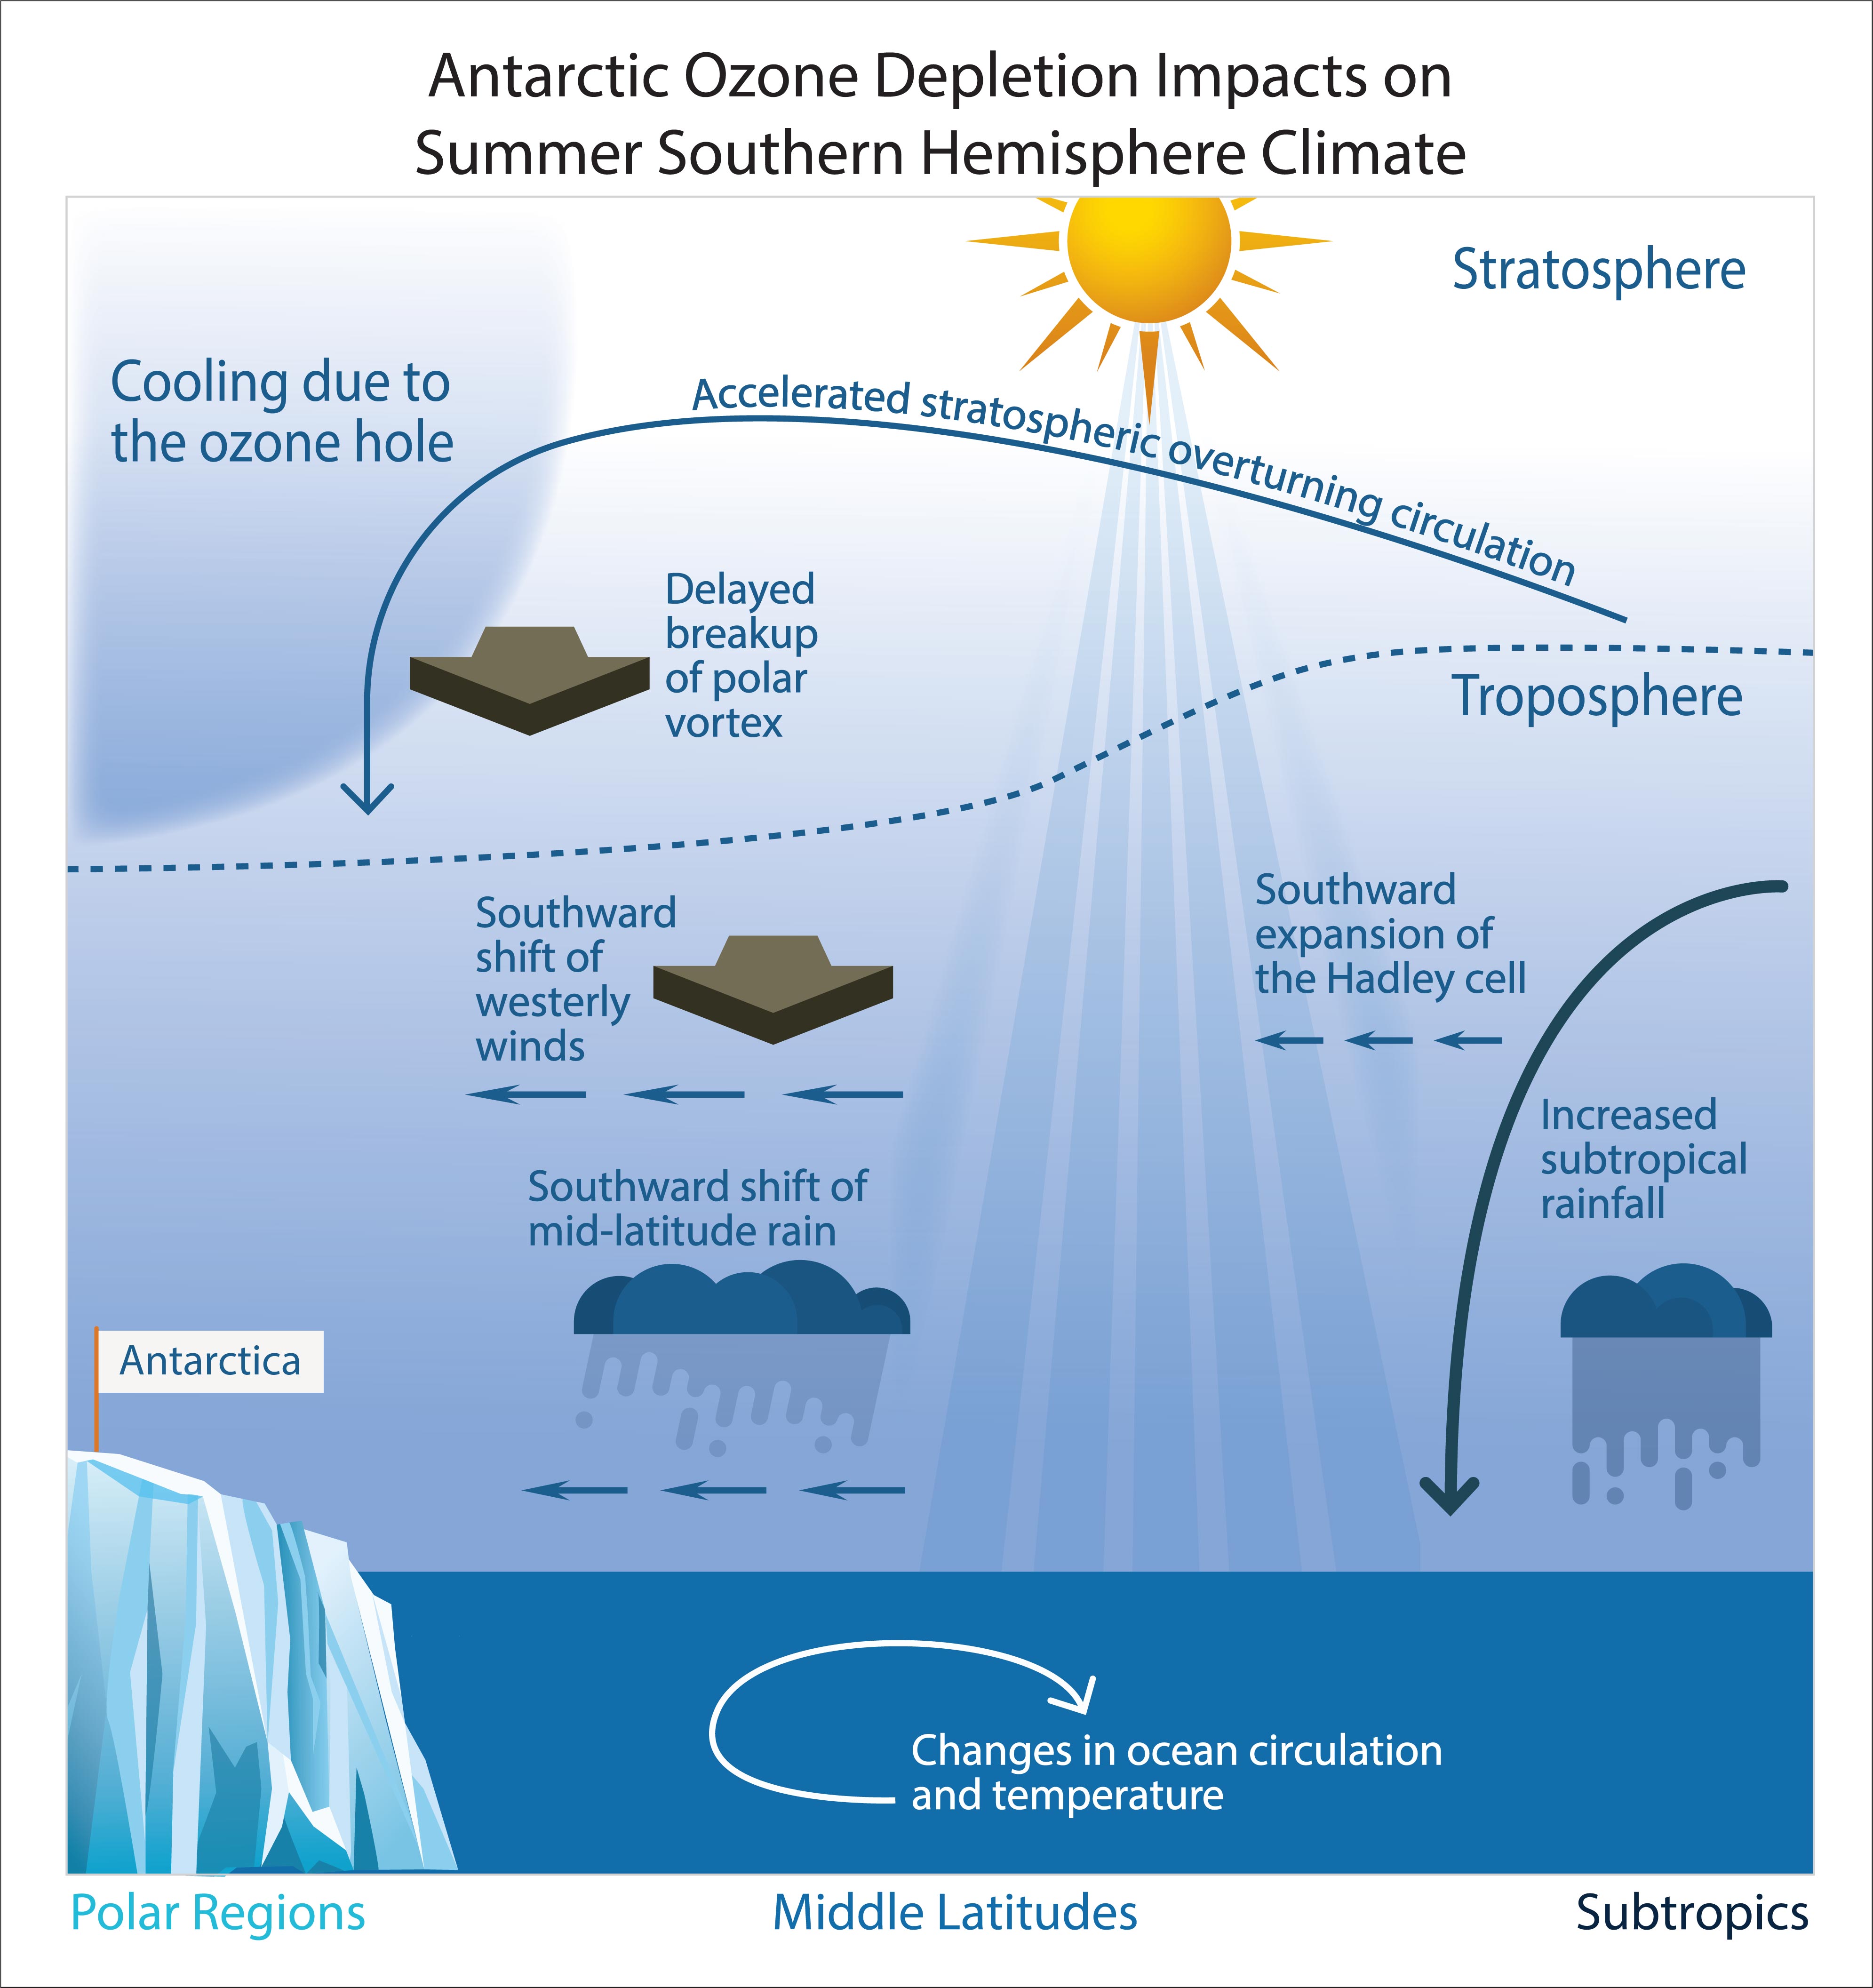 Antarctic Ozone Depletion Impacts on Summer Southern Hemisphere Climate